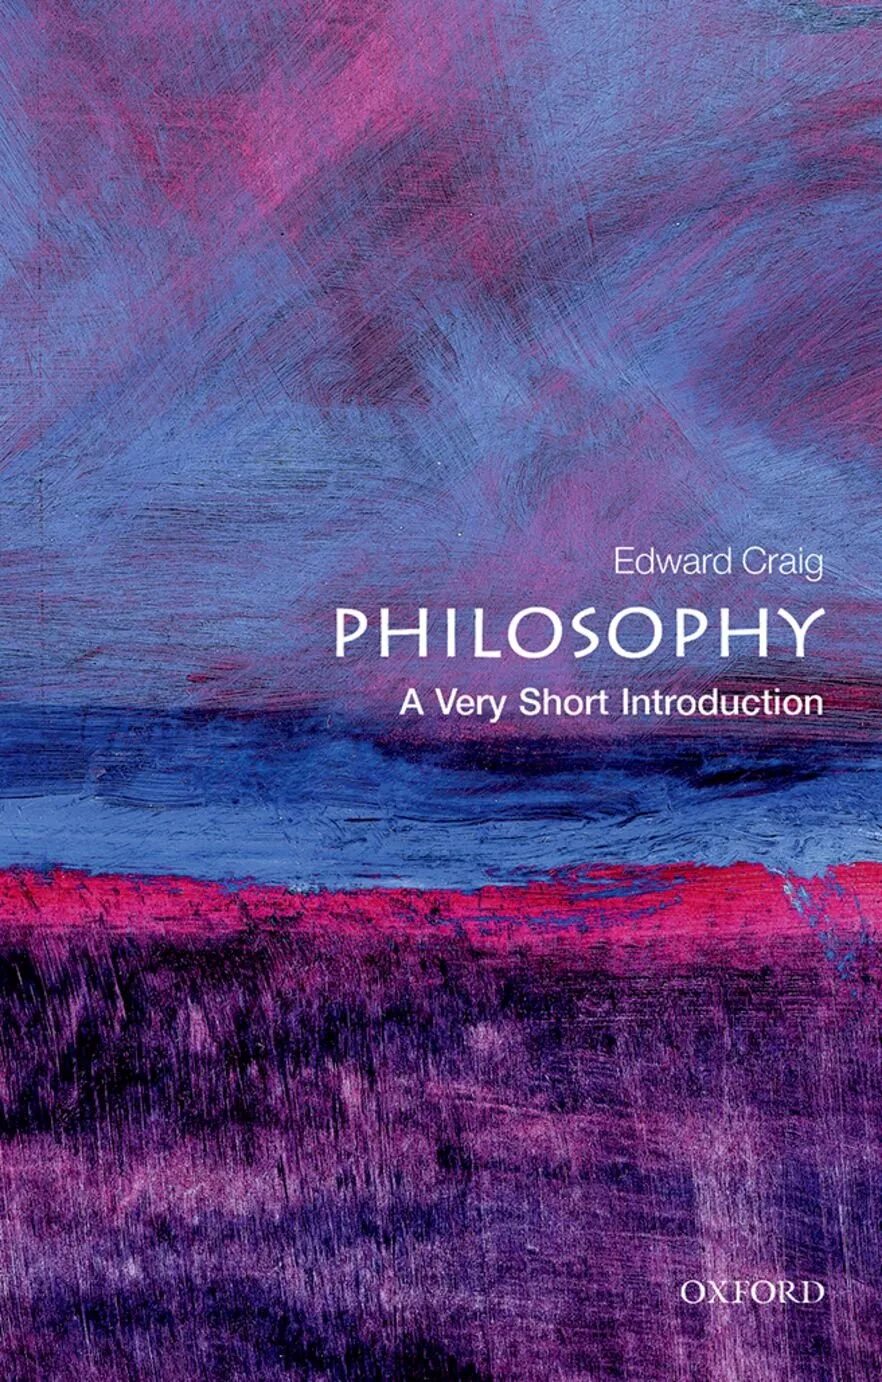 Short introduction. Very short Introductions. Very short Introduction Philosophy. Philosophy: a very short Introduction by Edward Craig. Philosophy of Law: a very short Introduction.